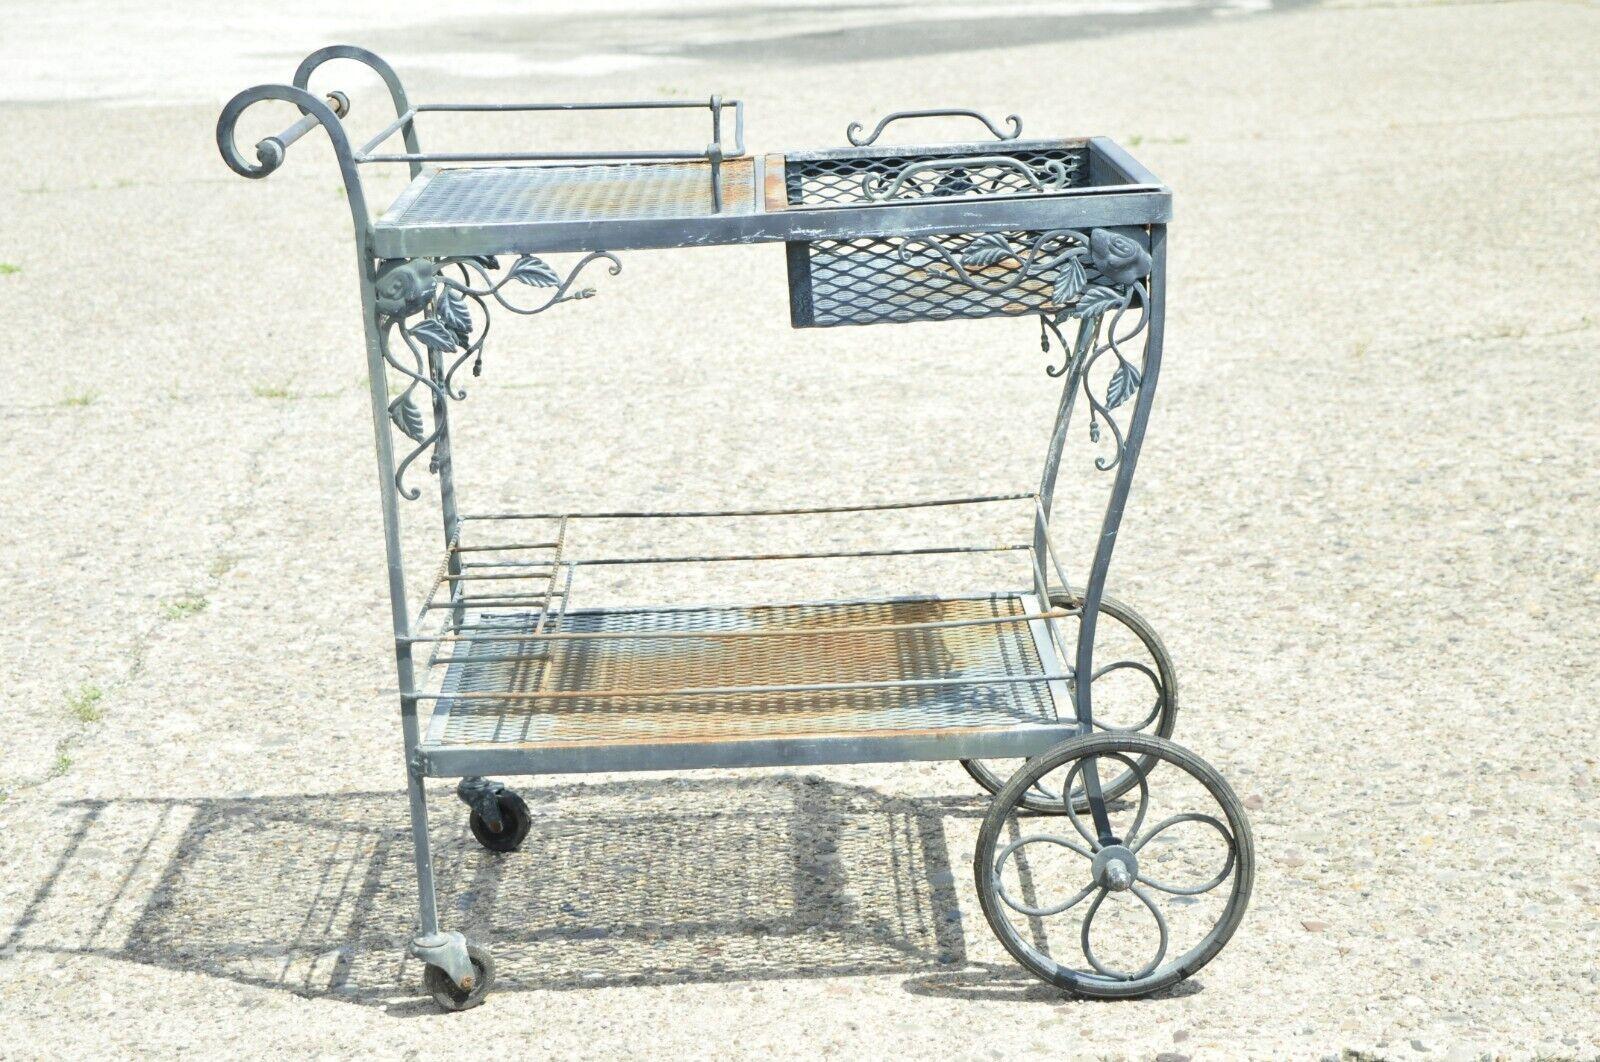 John Salterini Wrought Iron Green Garden Leaf Vine Bar Tea Cart Server. Item features rolling wheels, ornate leaf and vine design, lift out serving tray, wrought iron construction, very nice vintage item, great style and form. Circa Early to Mid